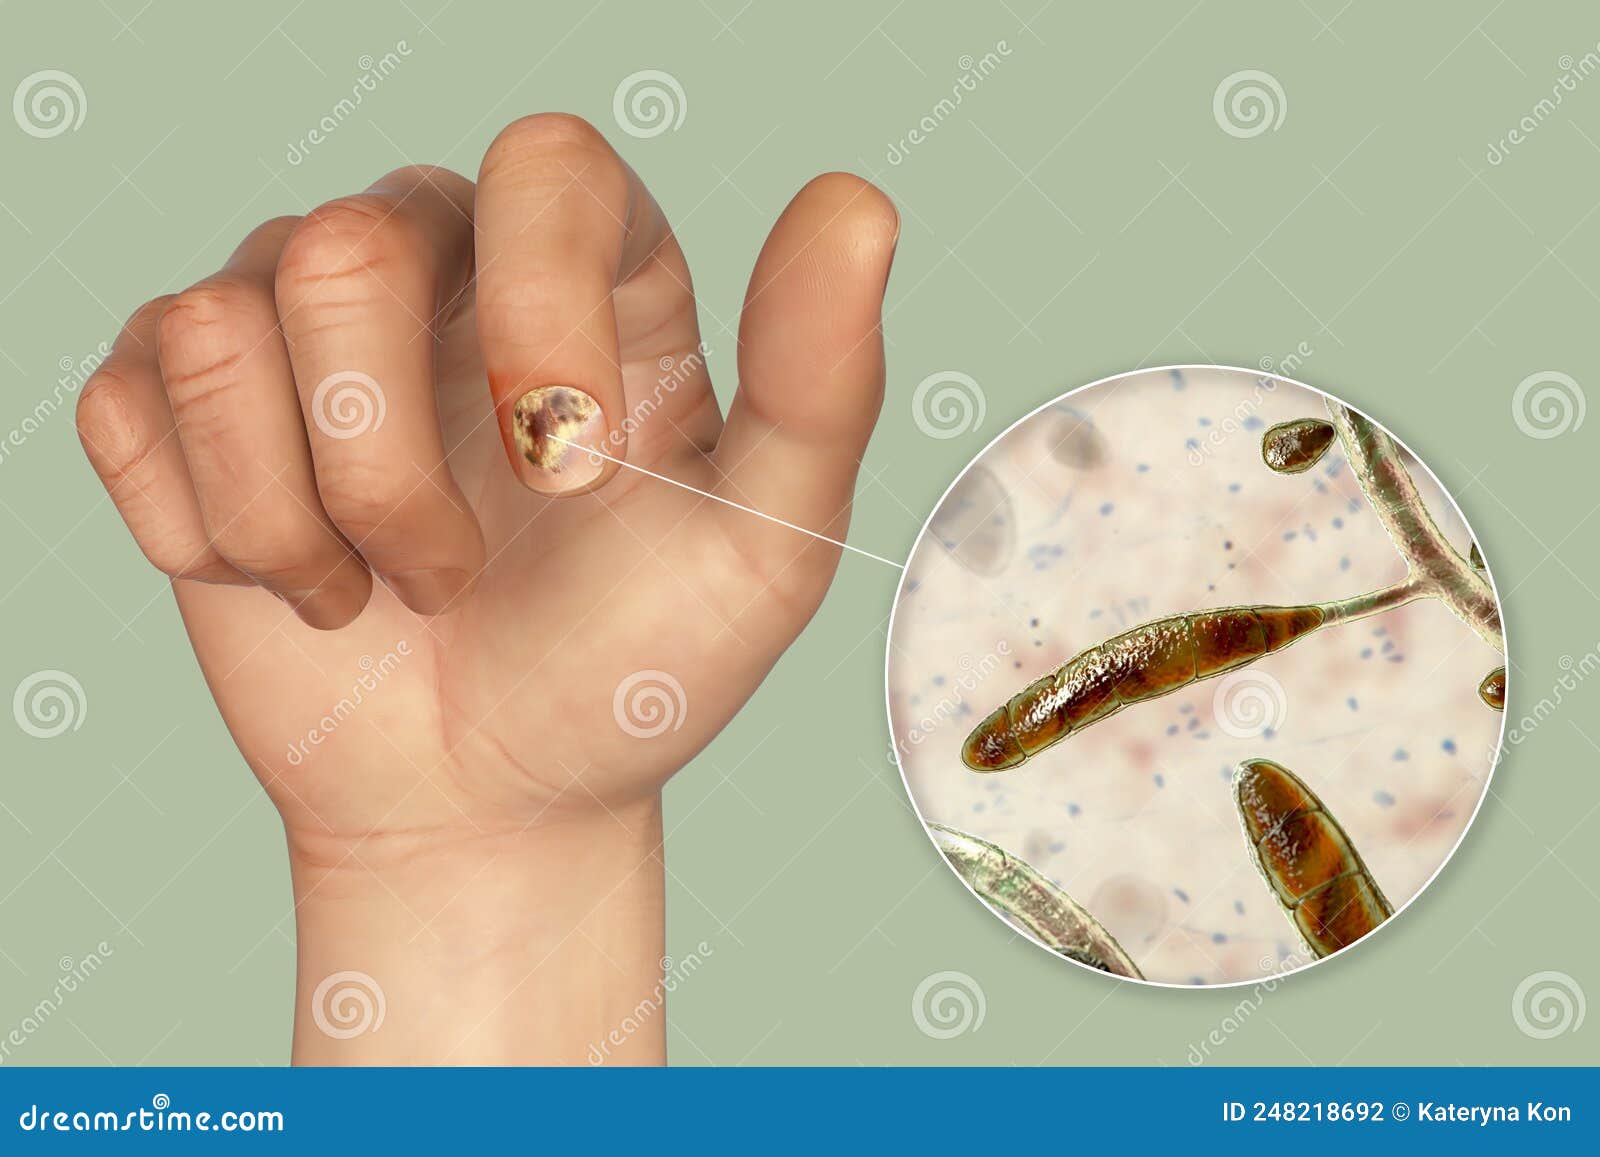 Nail inflammation hi-res stock photography and images - Alamy